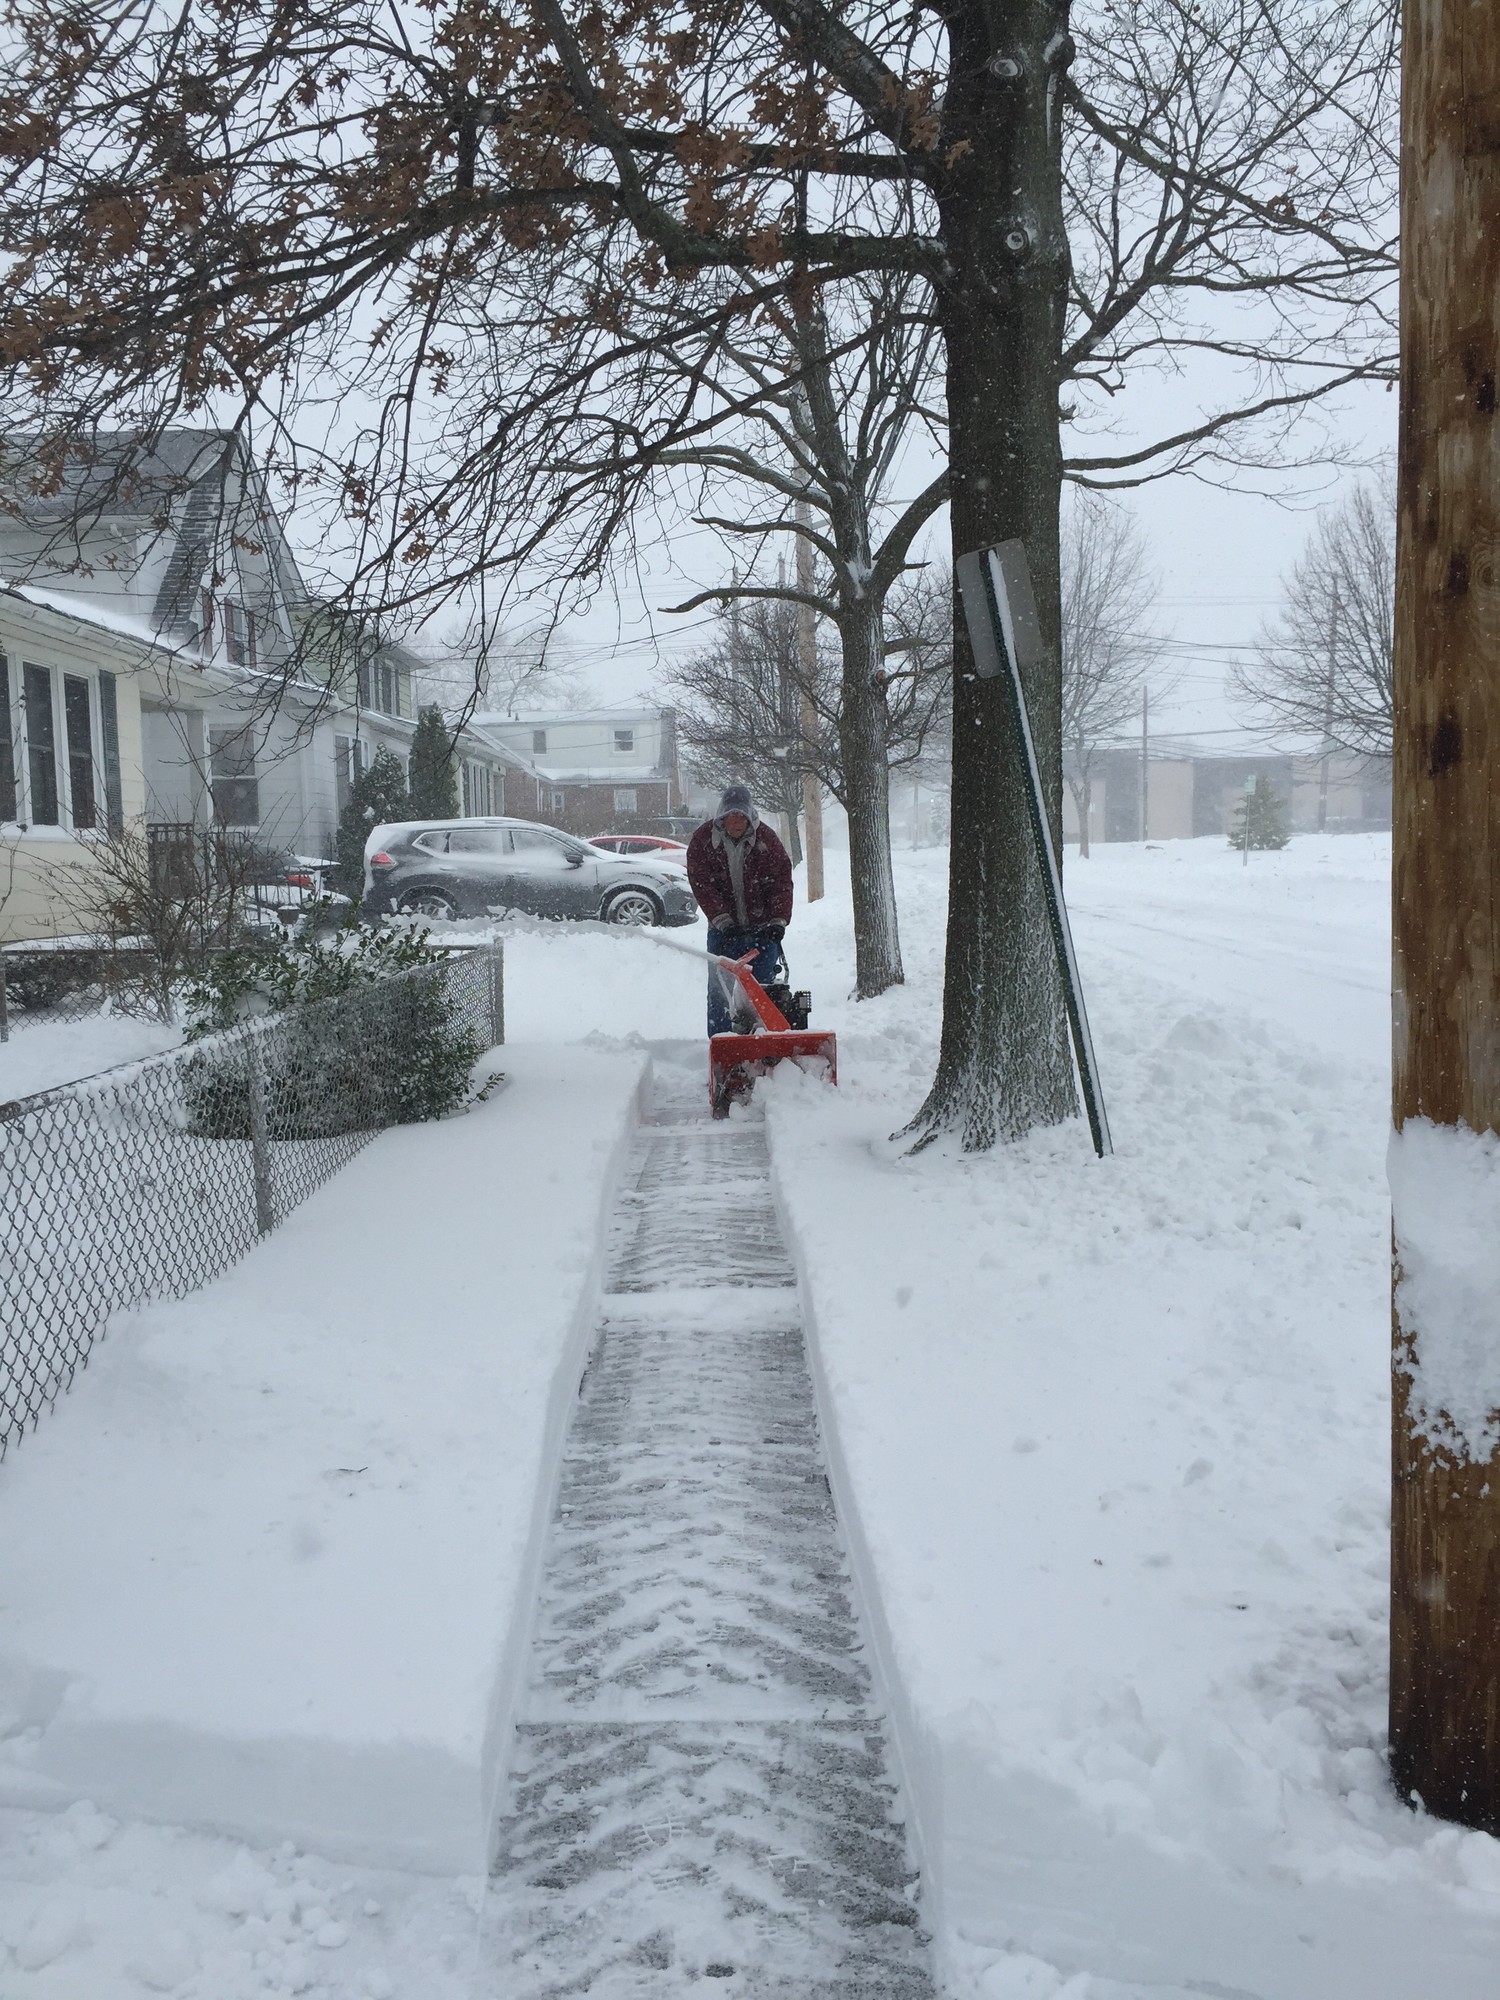 Jim Nicoletti fired up his snow blower on Merton Avenue in Lynbrook Saturday to try to get ahead of the storm.